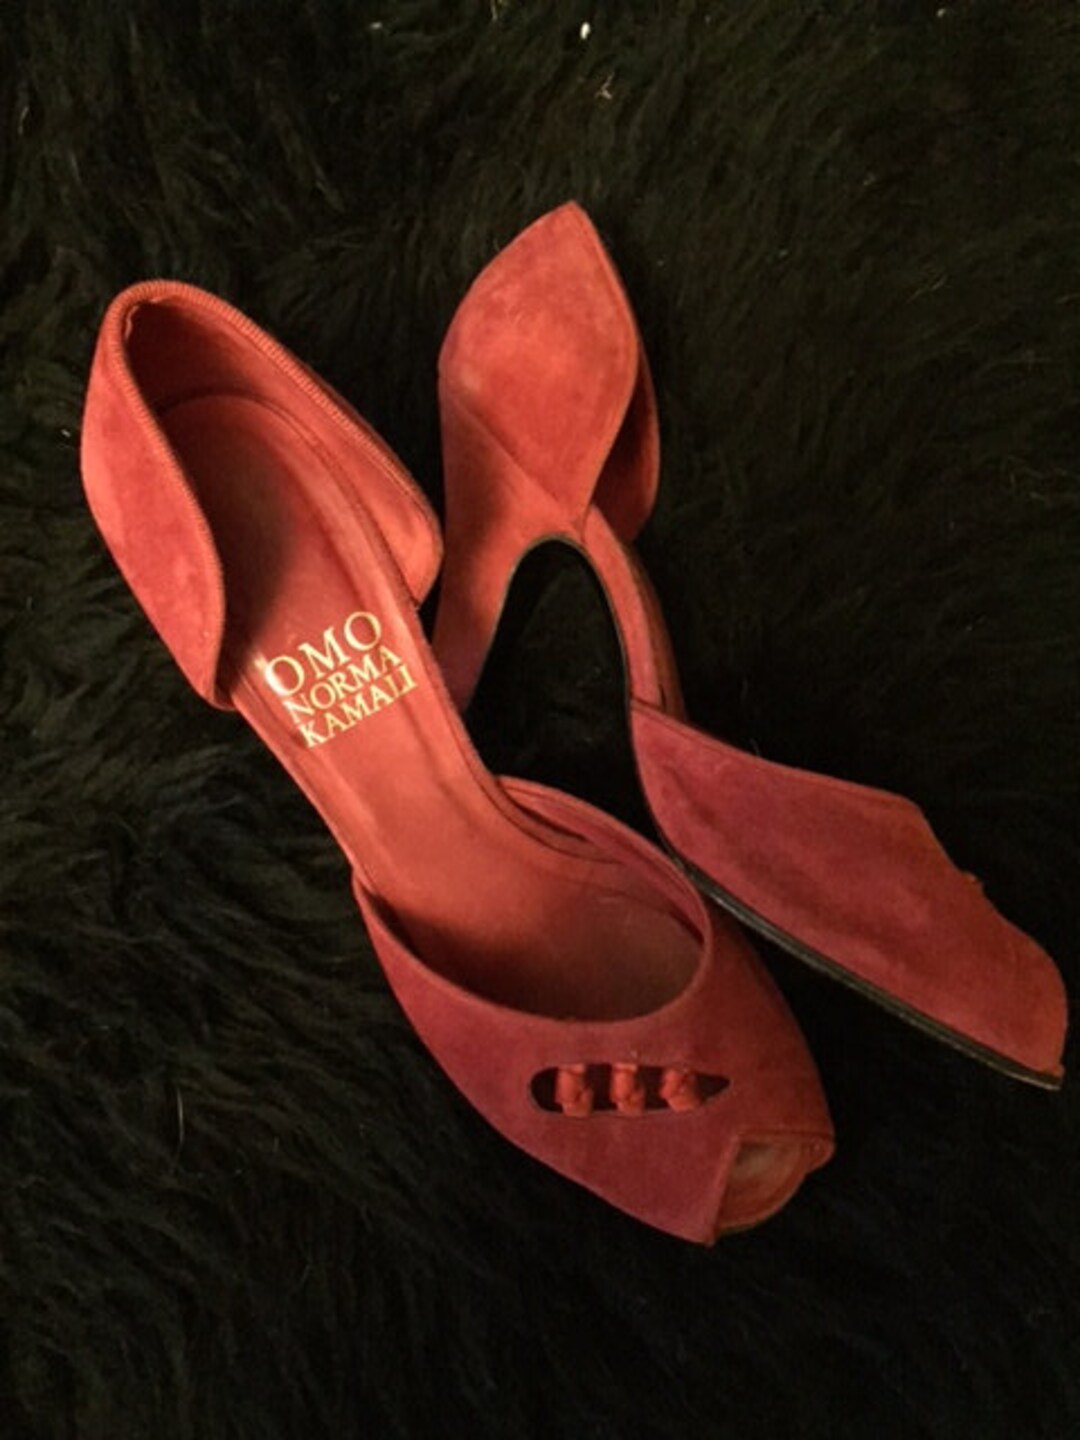 OMO Norma Kamali 1940s Style D'orsay Red Suede Heels 7B - Etsy